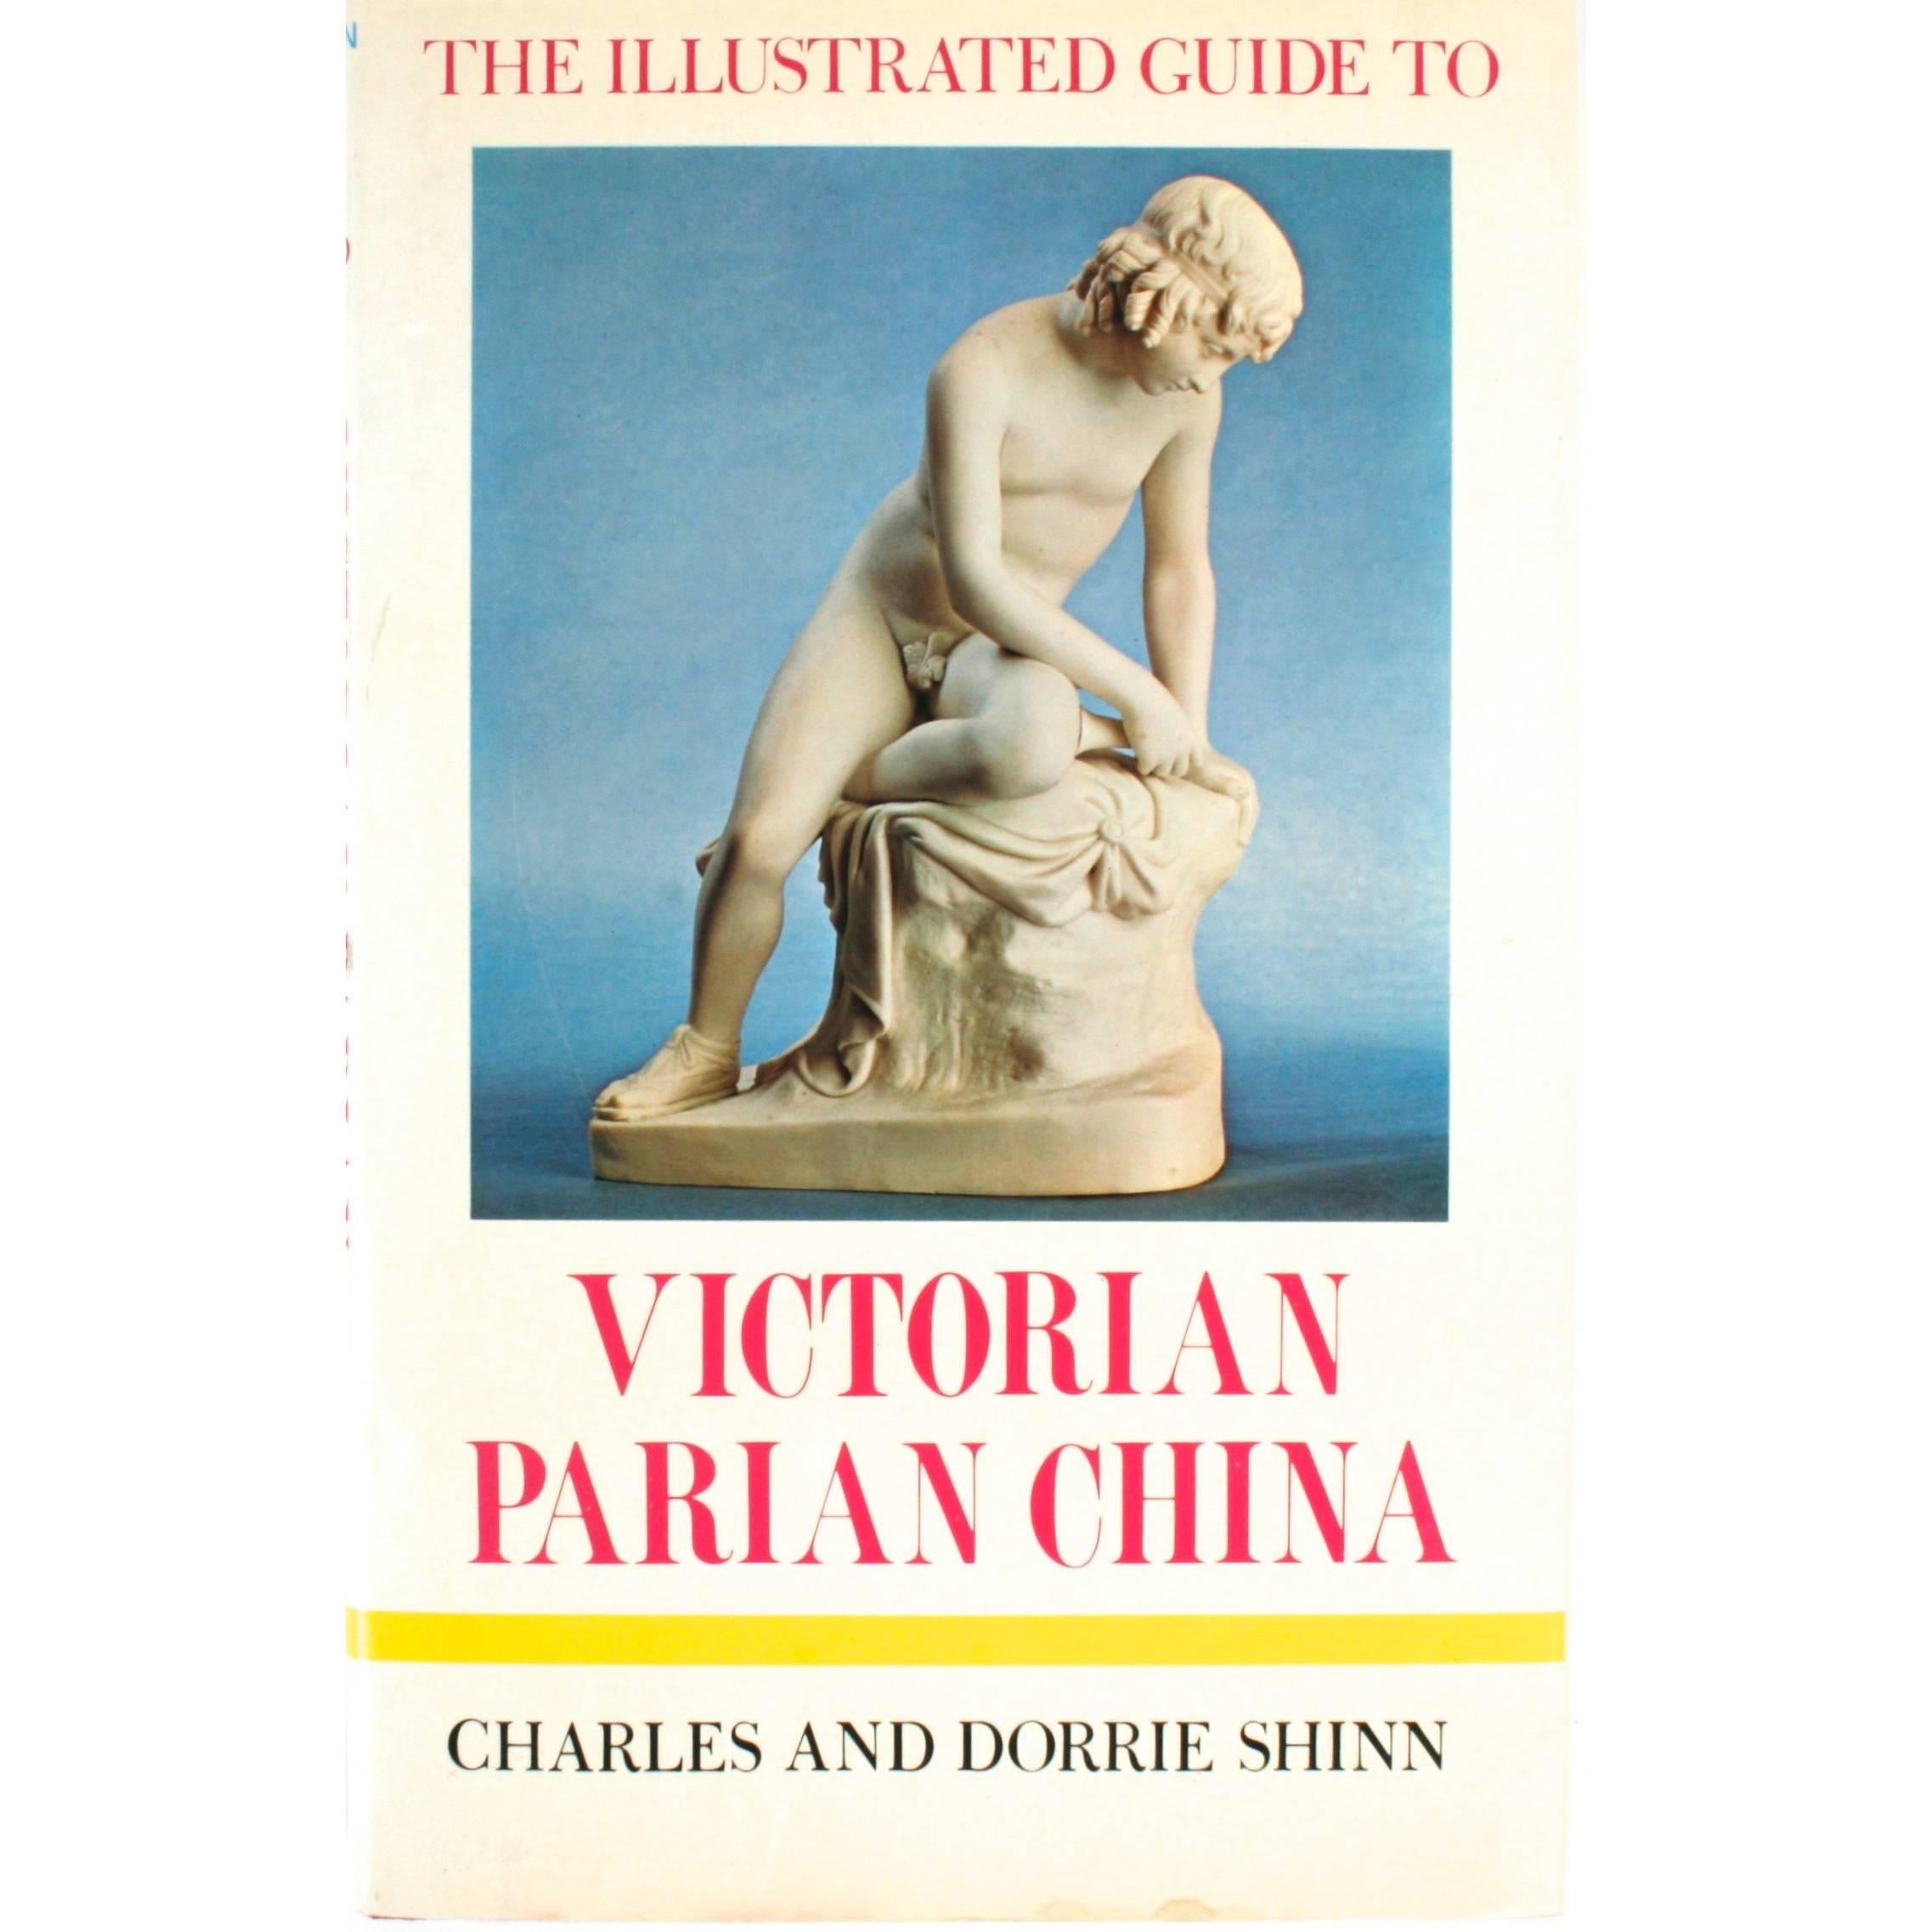 The Illustrated Guide to Victorian Parian China, First Edition